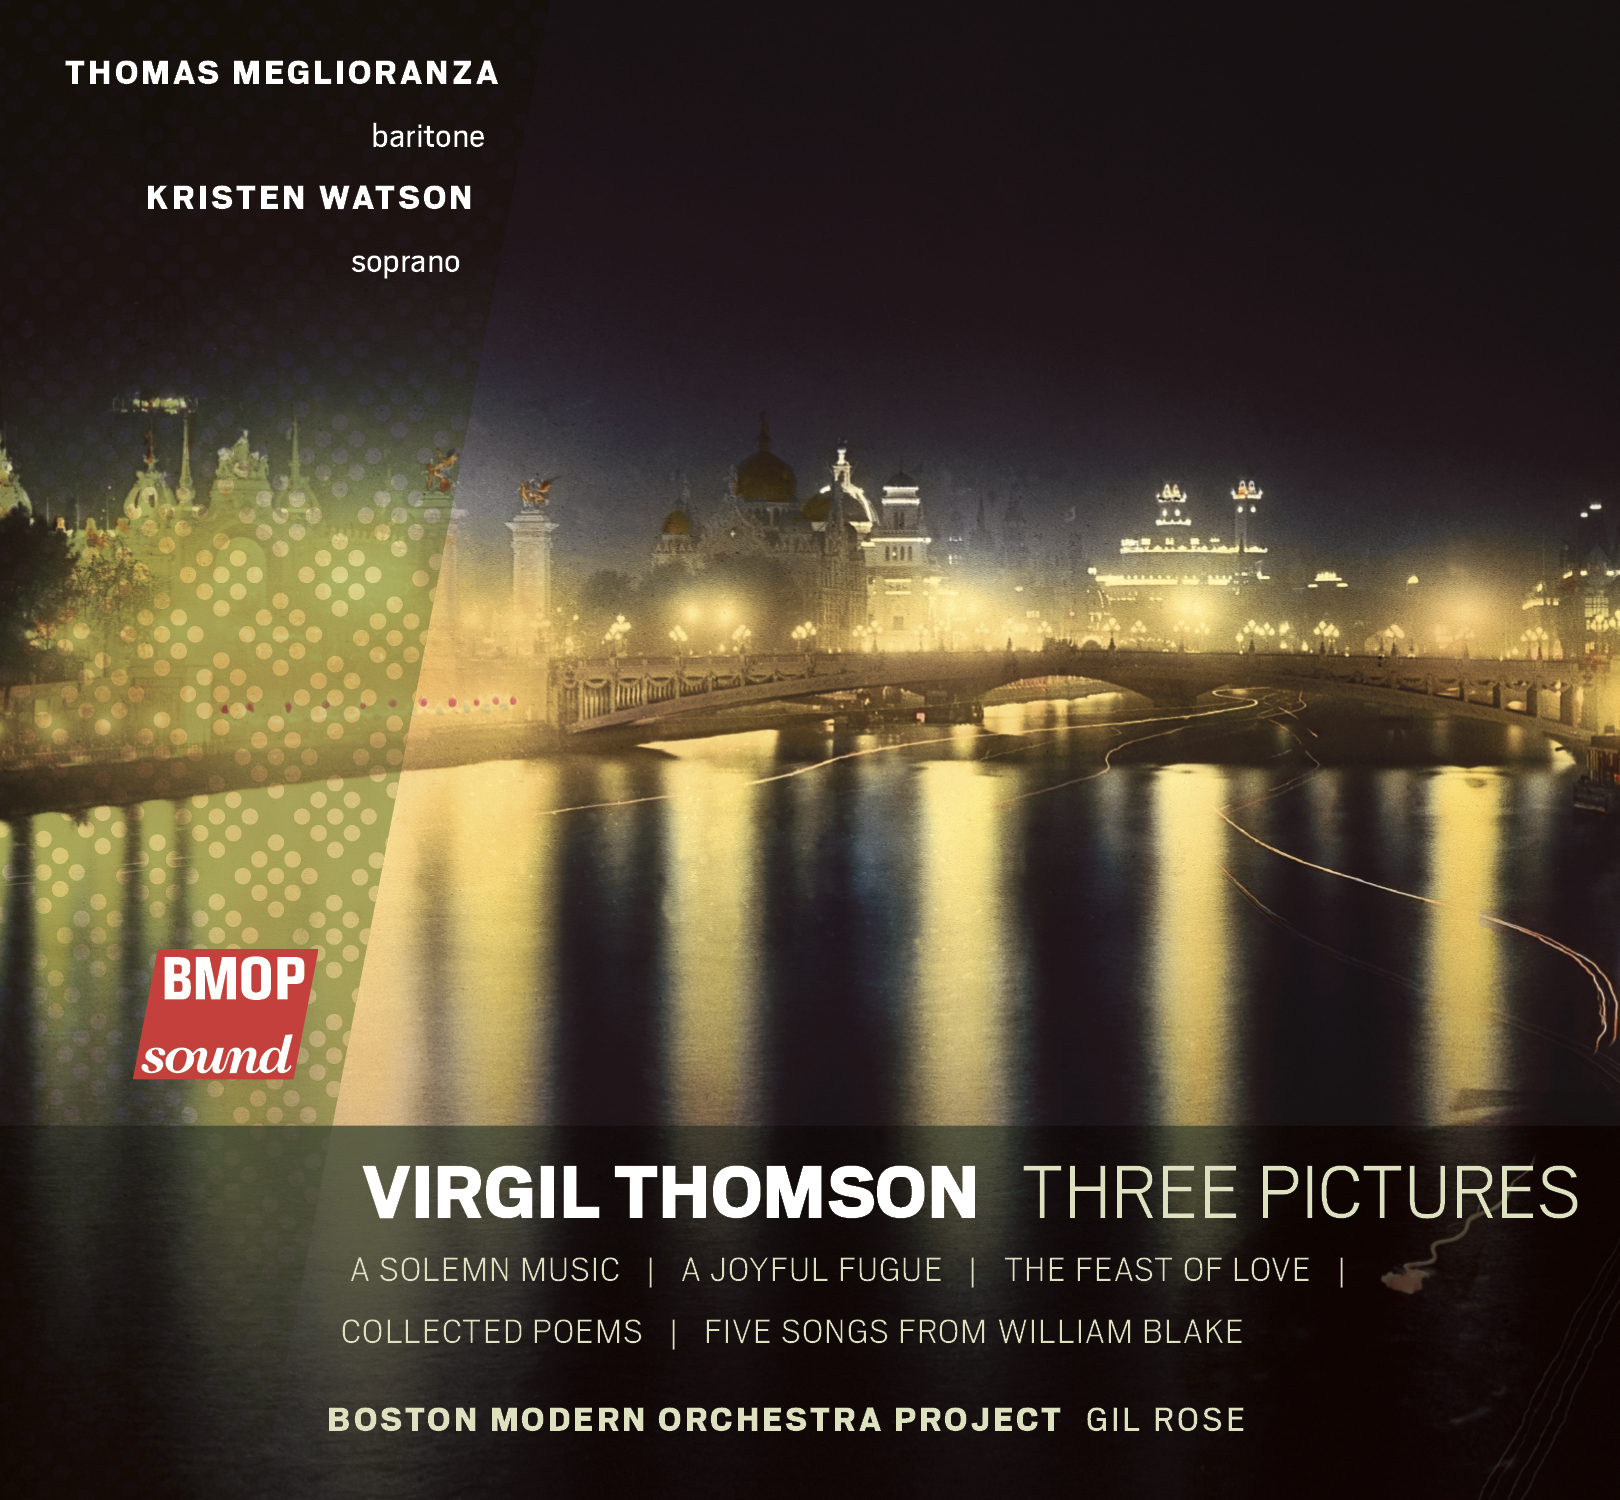 Art for Five Songs From William Blake- 3. The Land Of Dreams by Virgil Thomson by Thomas Meglioranza, baritone